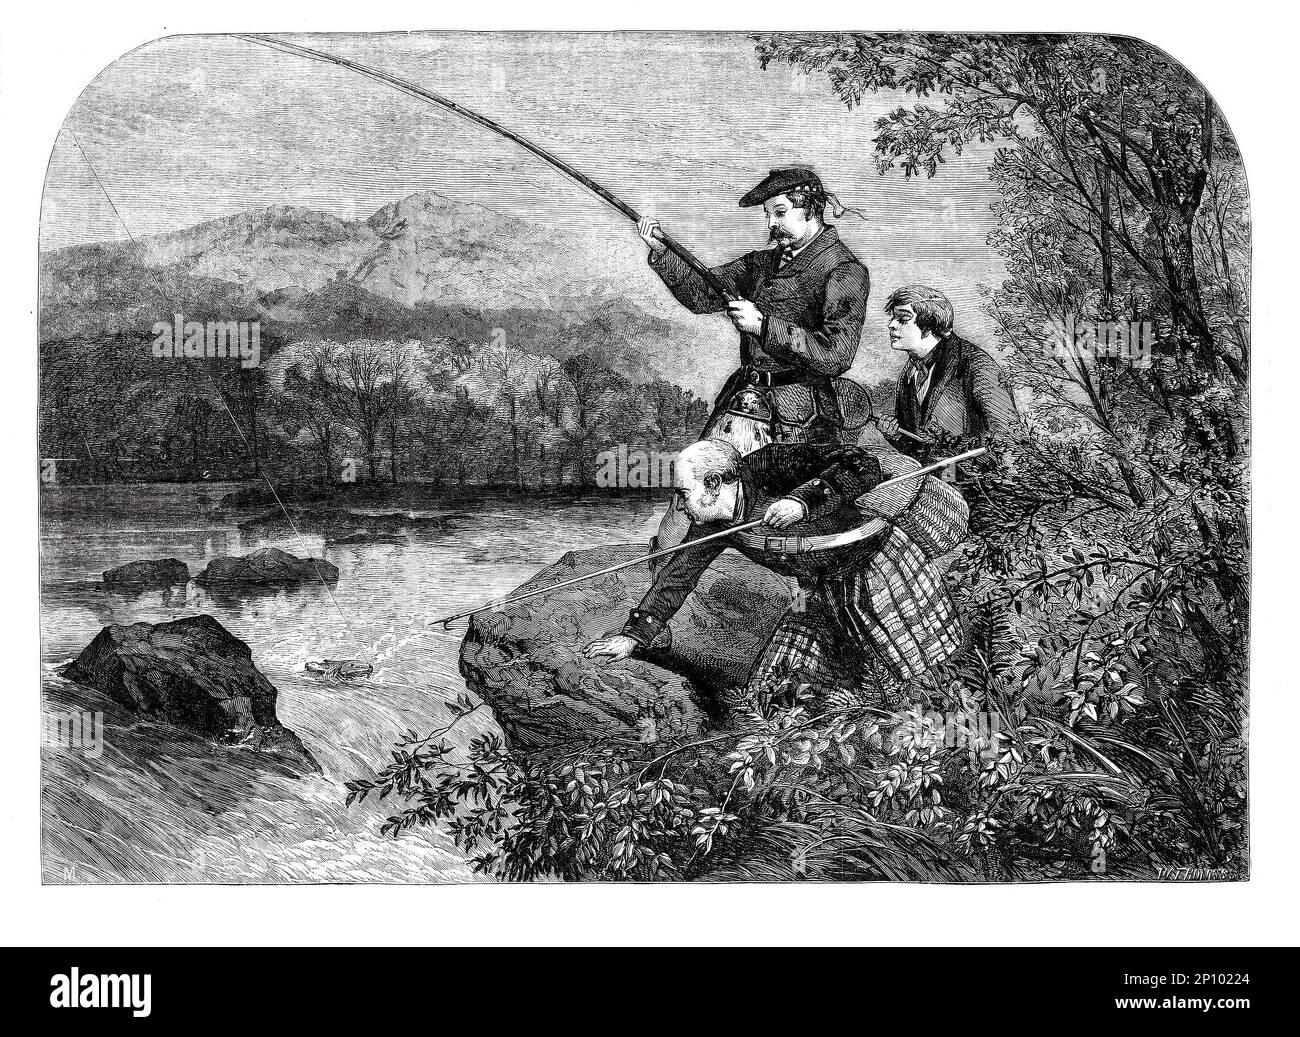 Kilted Scottish anglers fishing for Salmon in the Highlands by M S Morgan in 1860. Scotland is renowned for the Atlantic salmon, Salmo salar, that make their way from the marine feeding grounds in the North Atlantic into Scotland’s rivers and upstream  from January until November to reach the spawning beds by late autumn. Stock Photo